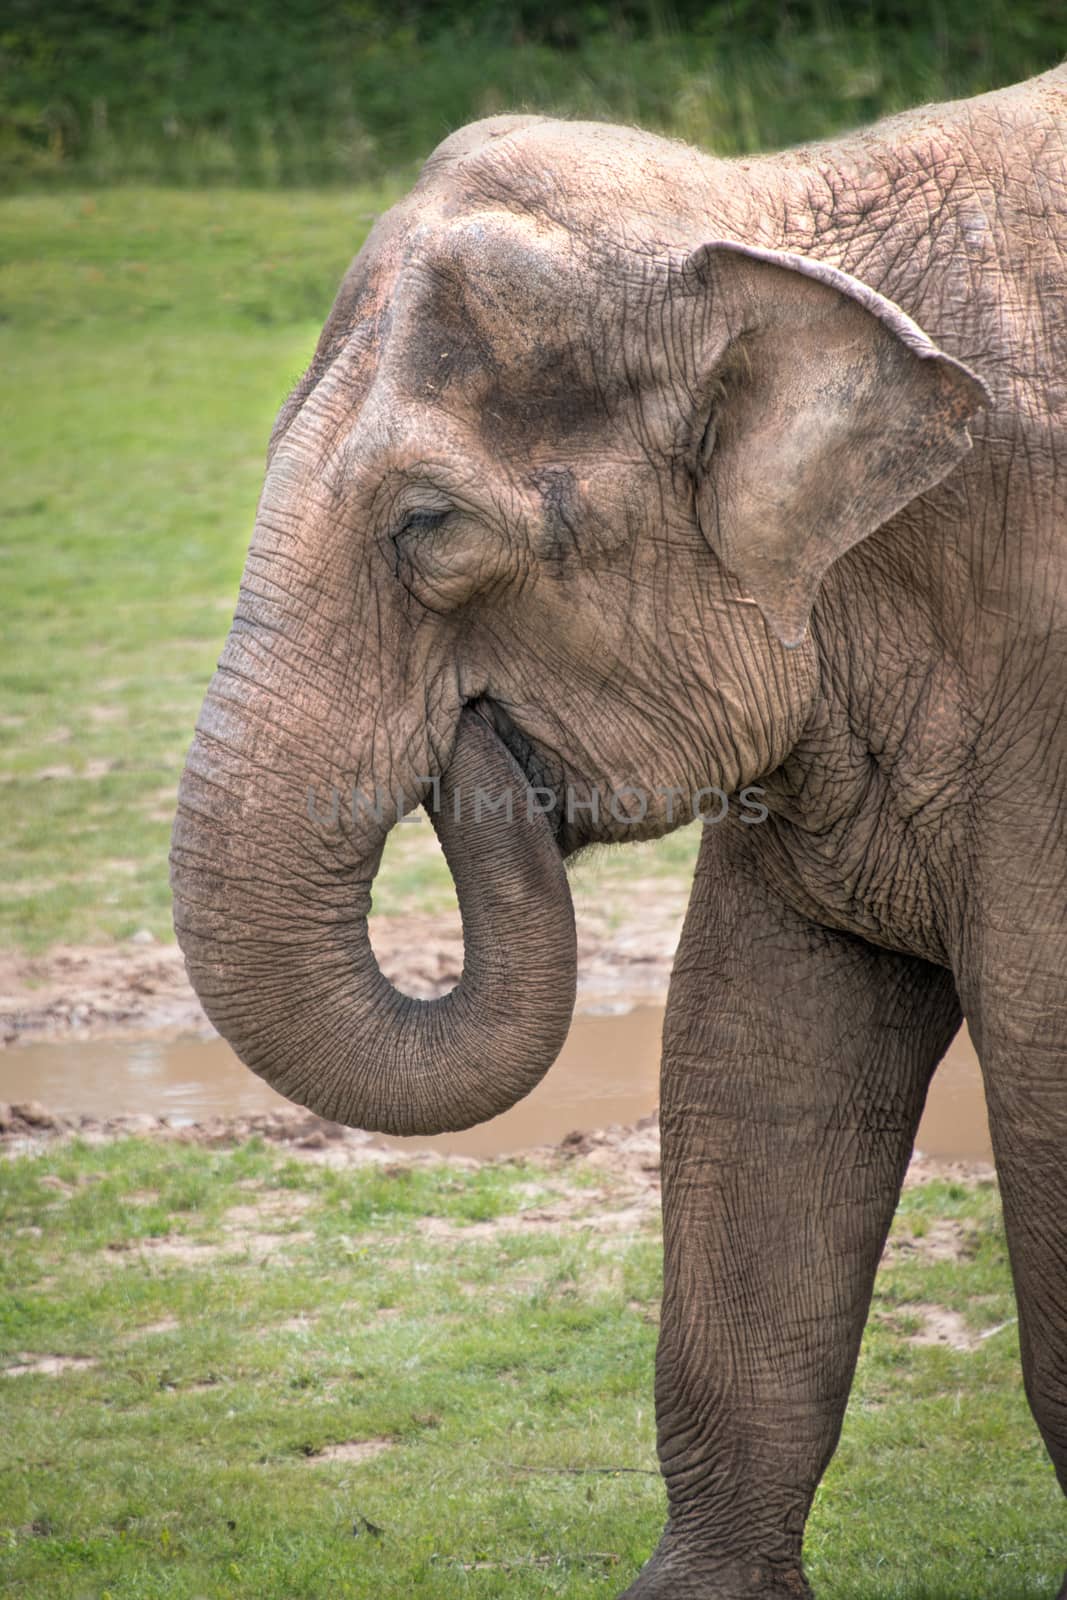 An upright vertical image of a elephant in profile with its trunk in its mouth feeding. Portrait view of its head and front legs